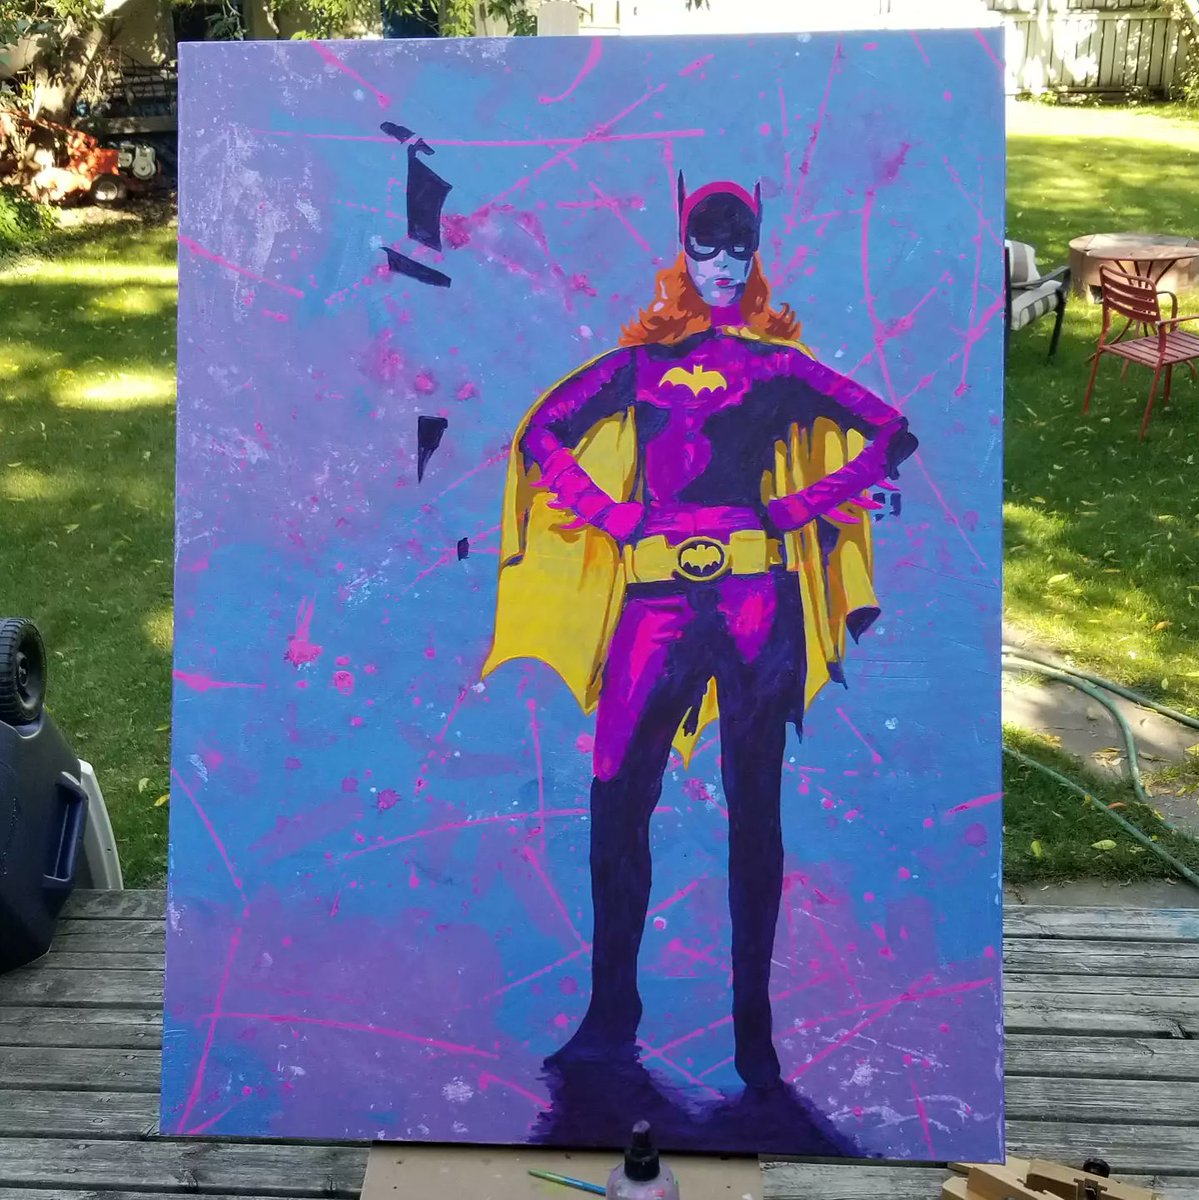 Working on this painting today to get it finished to show you at @StrathearnArt. I'll be there Sat.Sept.11 Hope to see you there. #art #artists #painting #strathearnartwalk #acrylicpainting #yegart #popart #KevinBigelowArt